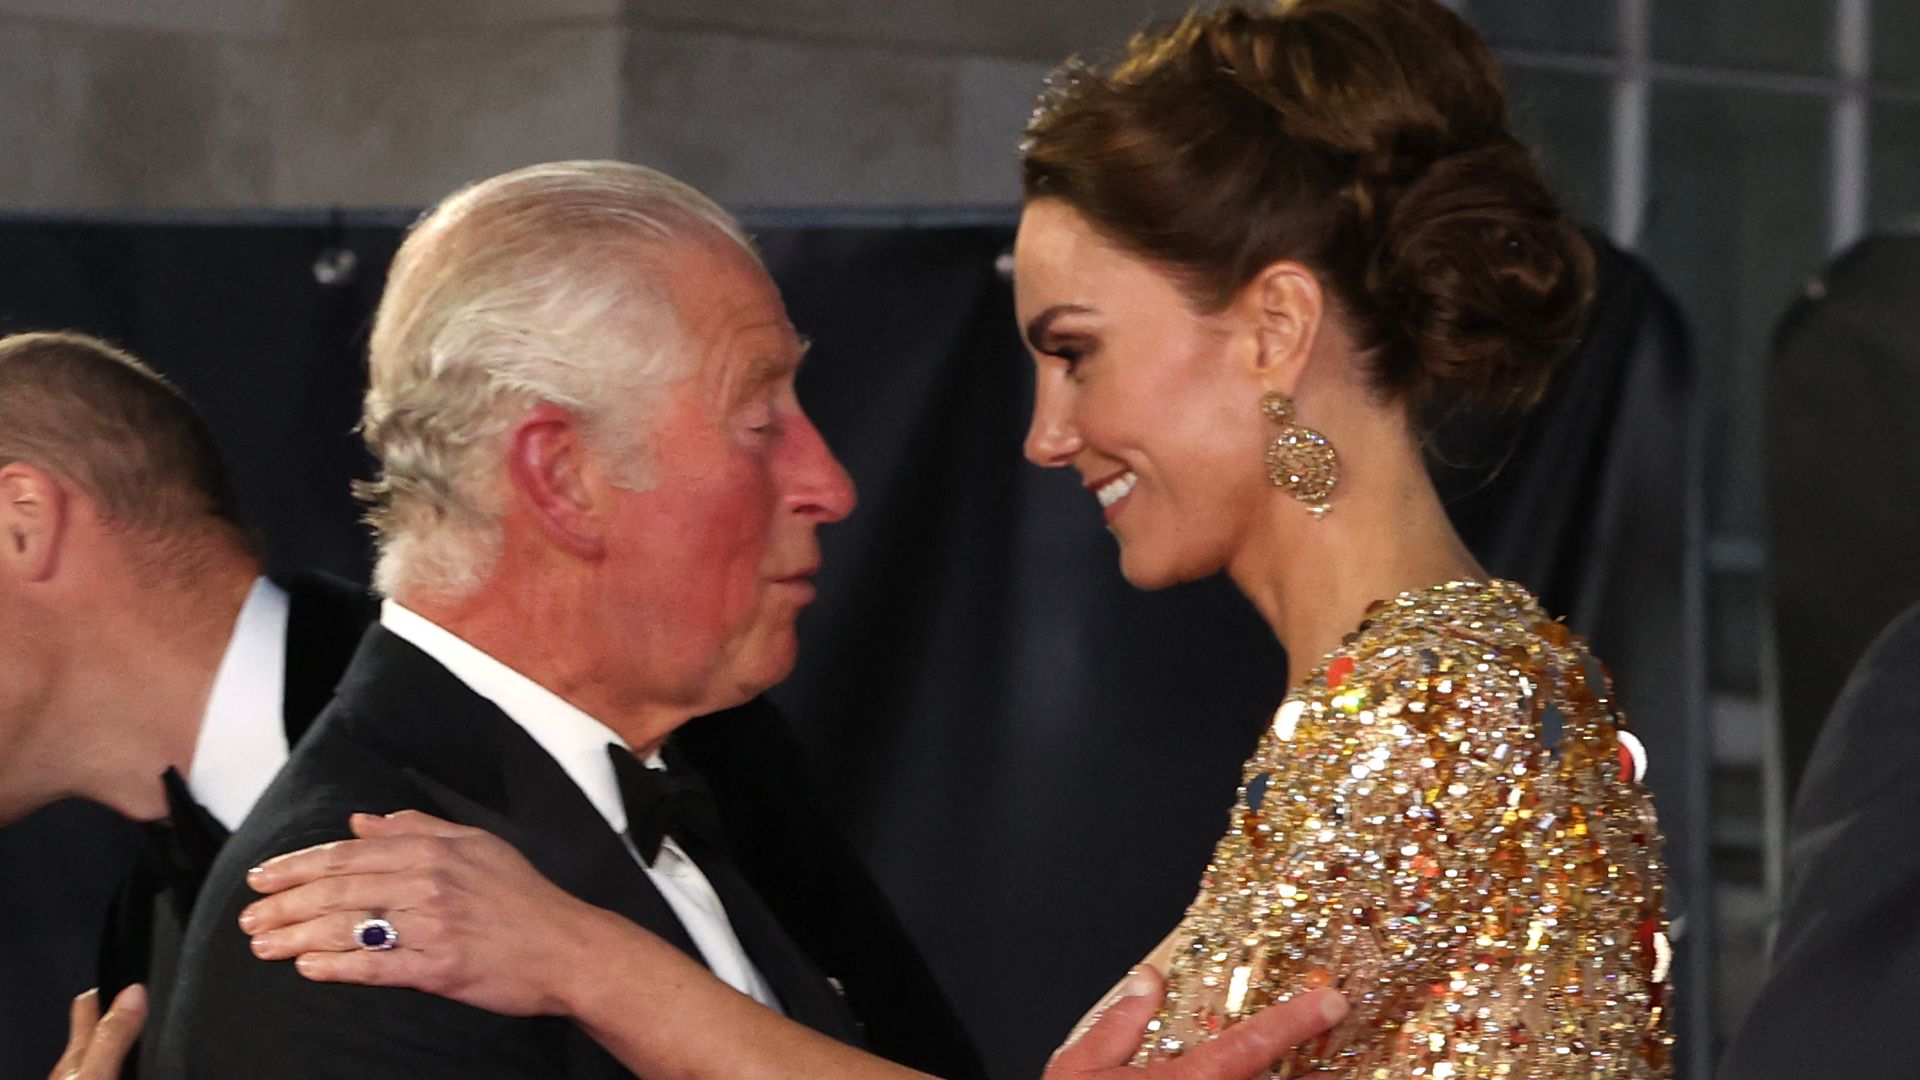 King Charles's sweetest photos with 'beloved daughter-in-law' Princess Kate